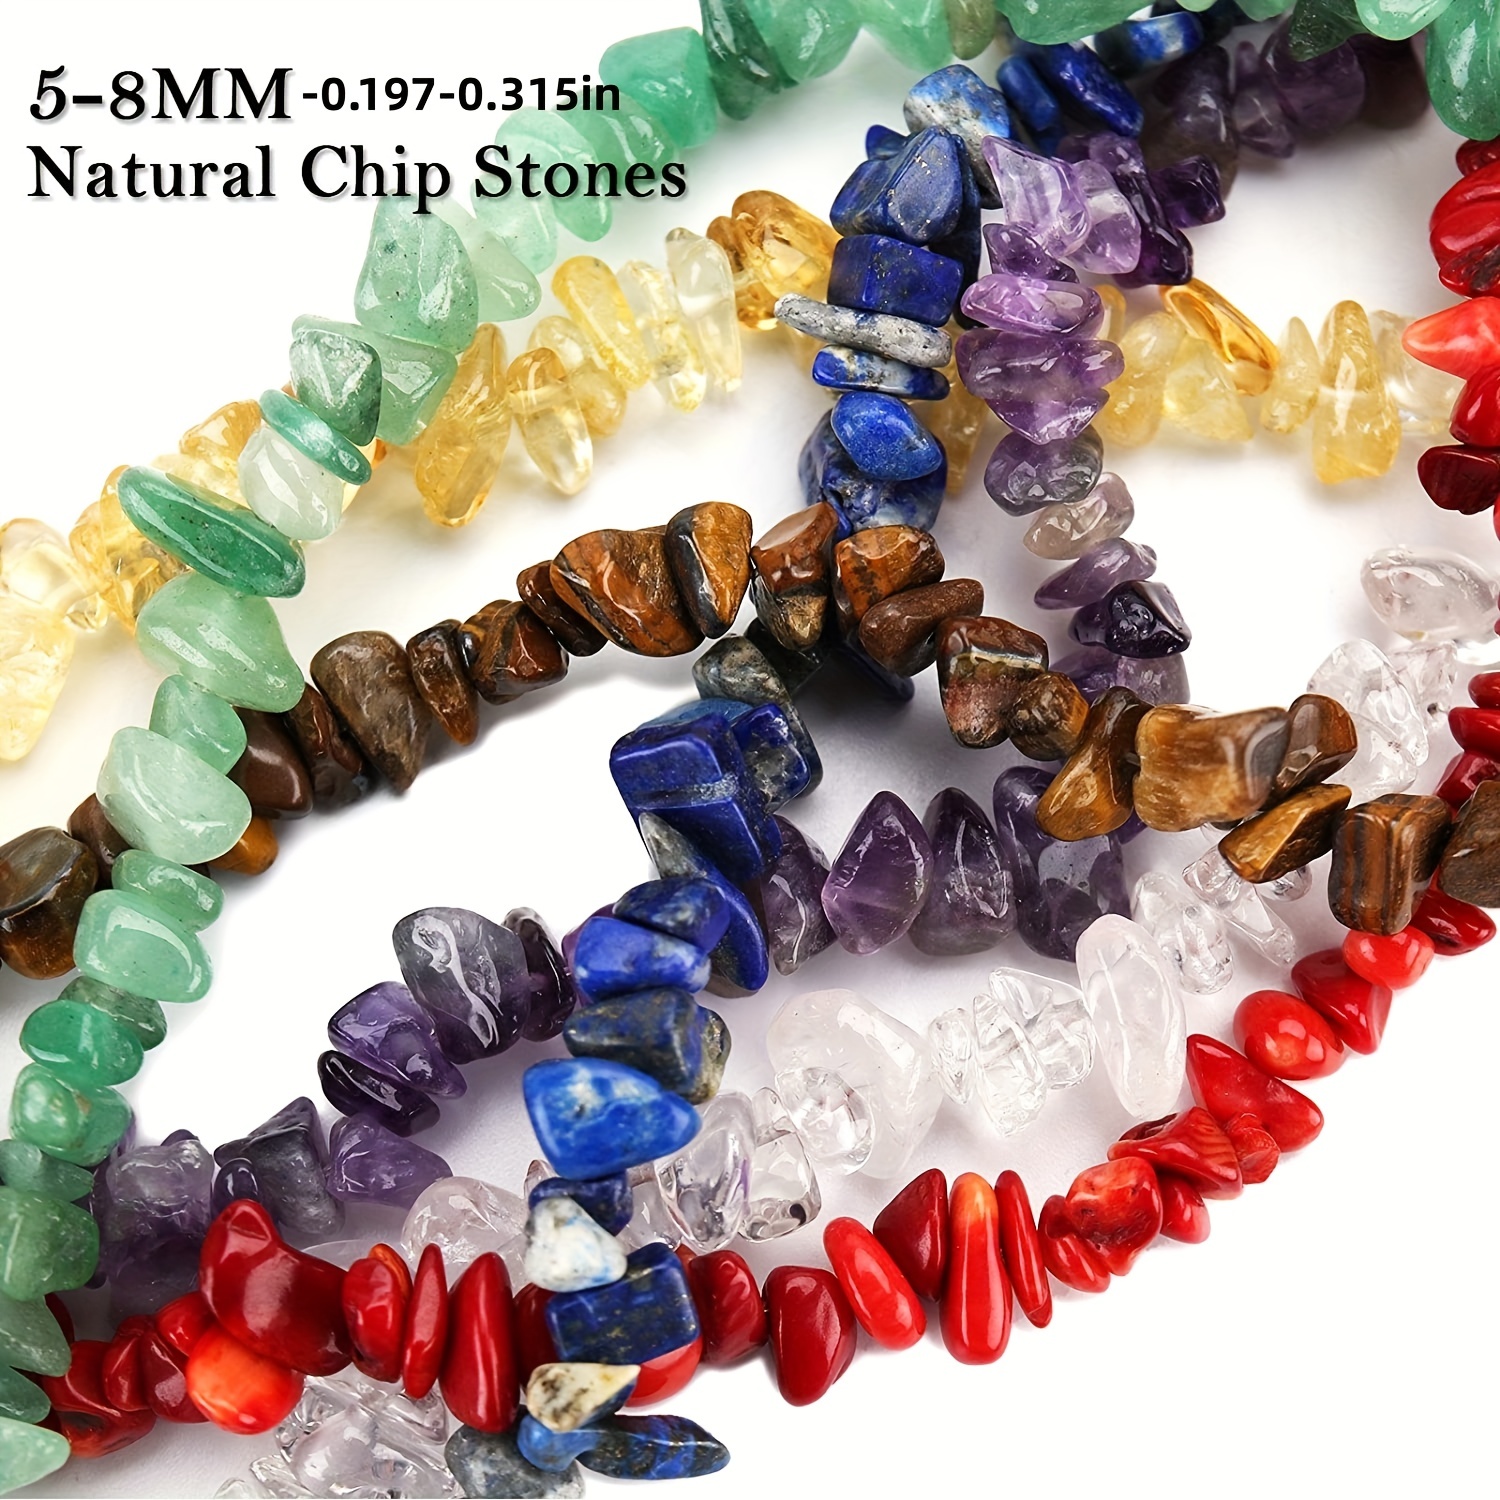 Natural Chip Stone Beads Multicolor 5-8mm About 400 Pieces Irregular  Gemstones Healing Crystal Loose Rocks Bead Hole Drilled DIY for Bracelet  Jewelry Making Crafting (5-8mm, Multicolor) 5-8mm Multicolor